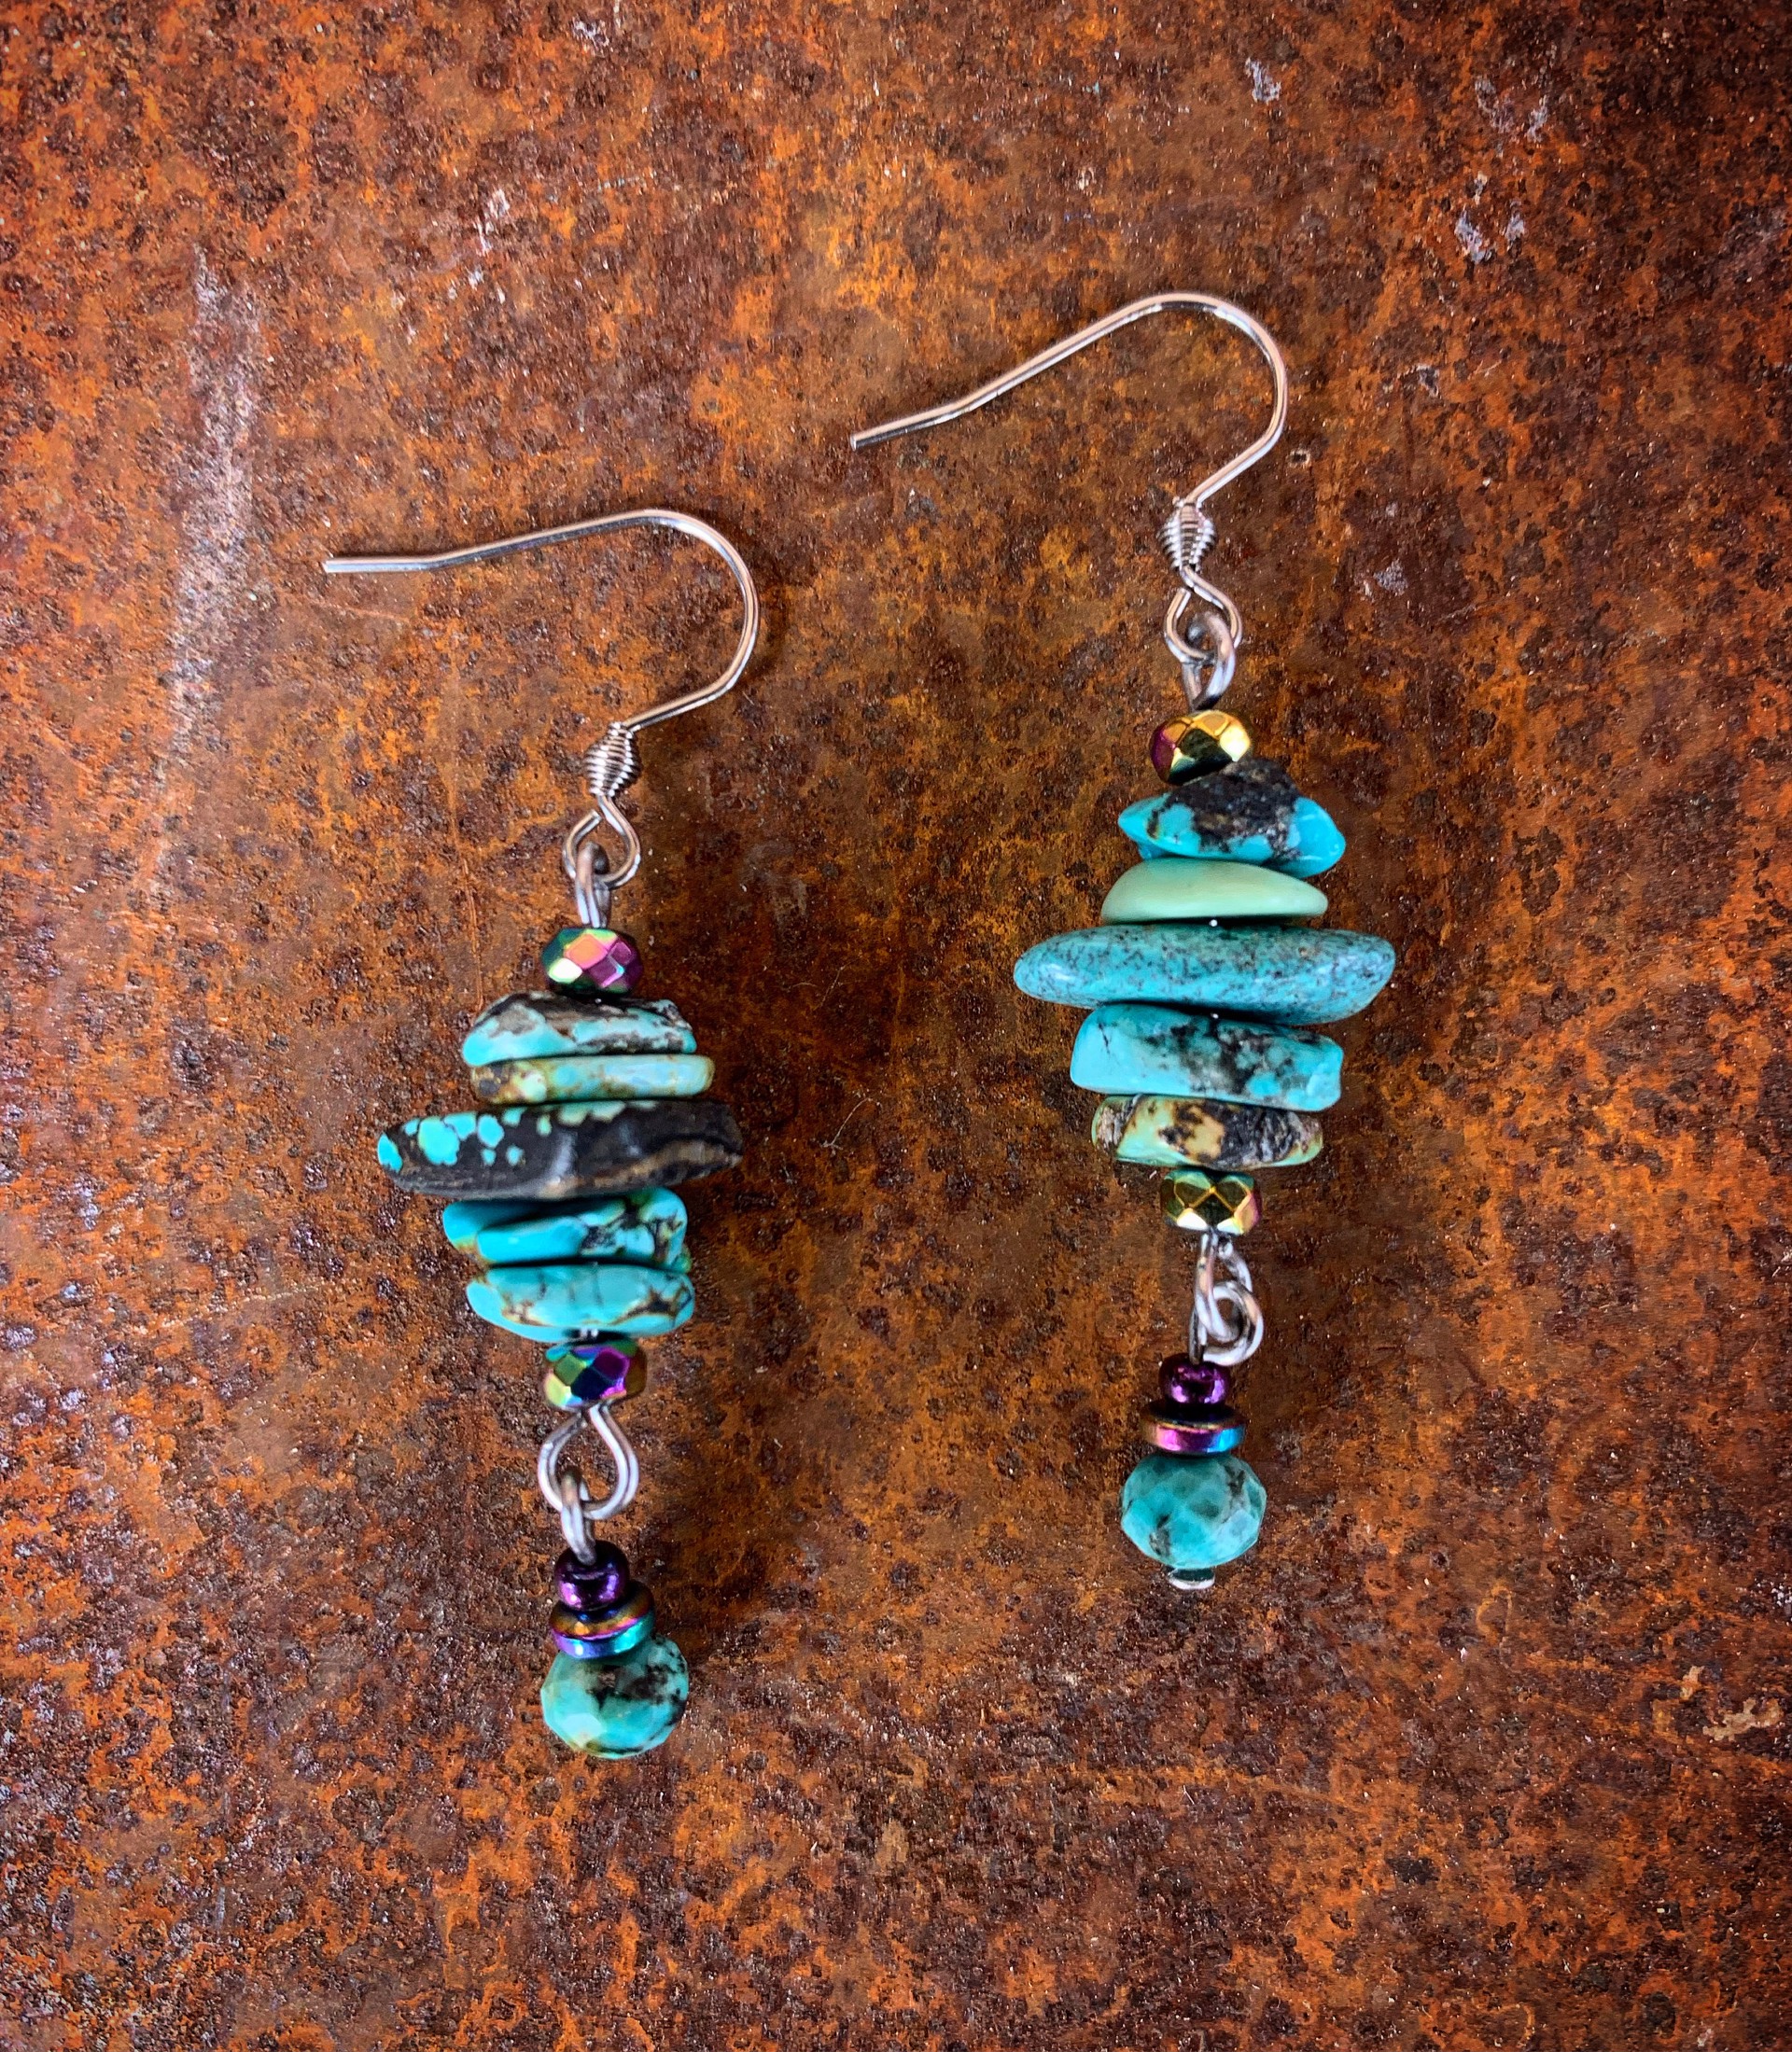 K762 Turquiose Chip Earrings by Kelly Ormsby